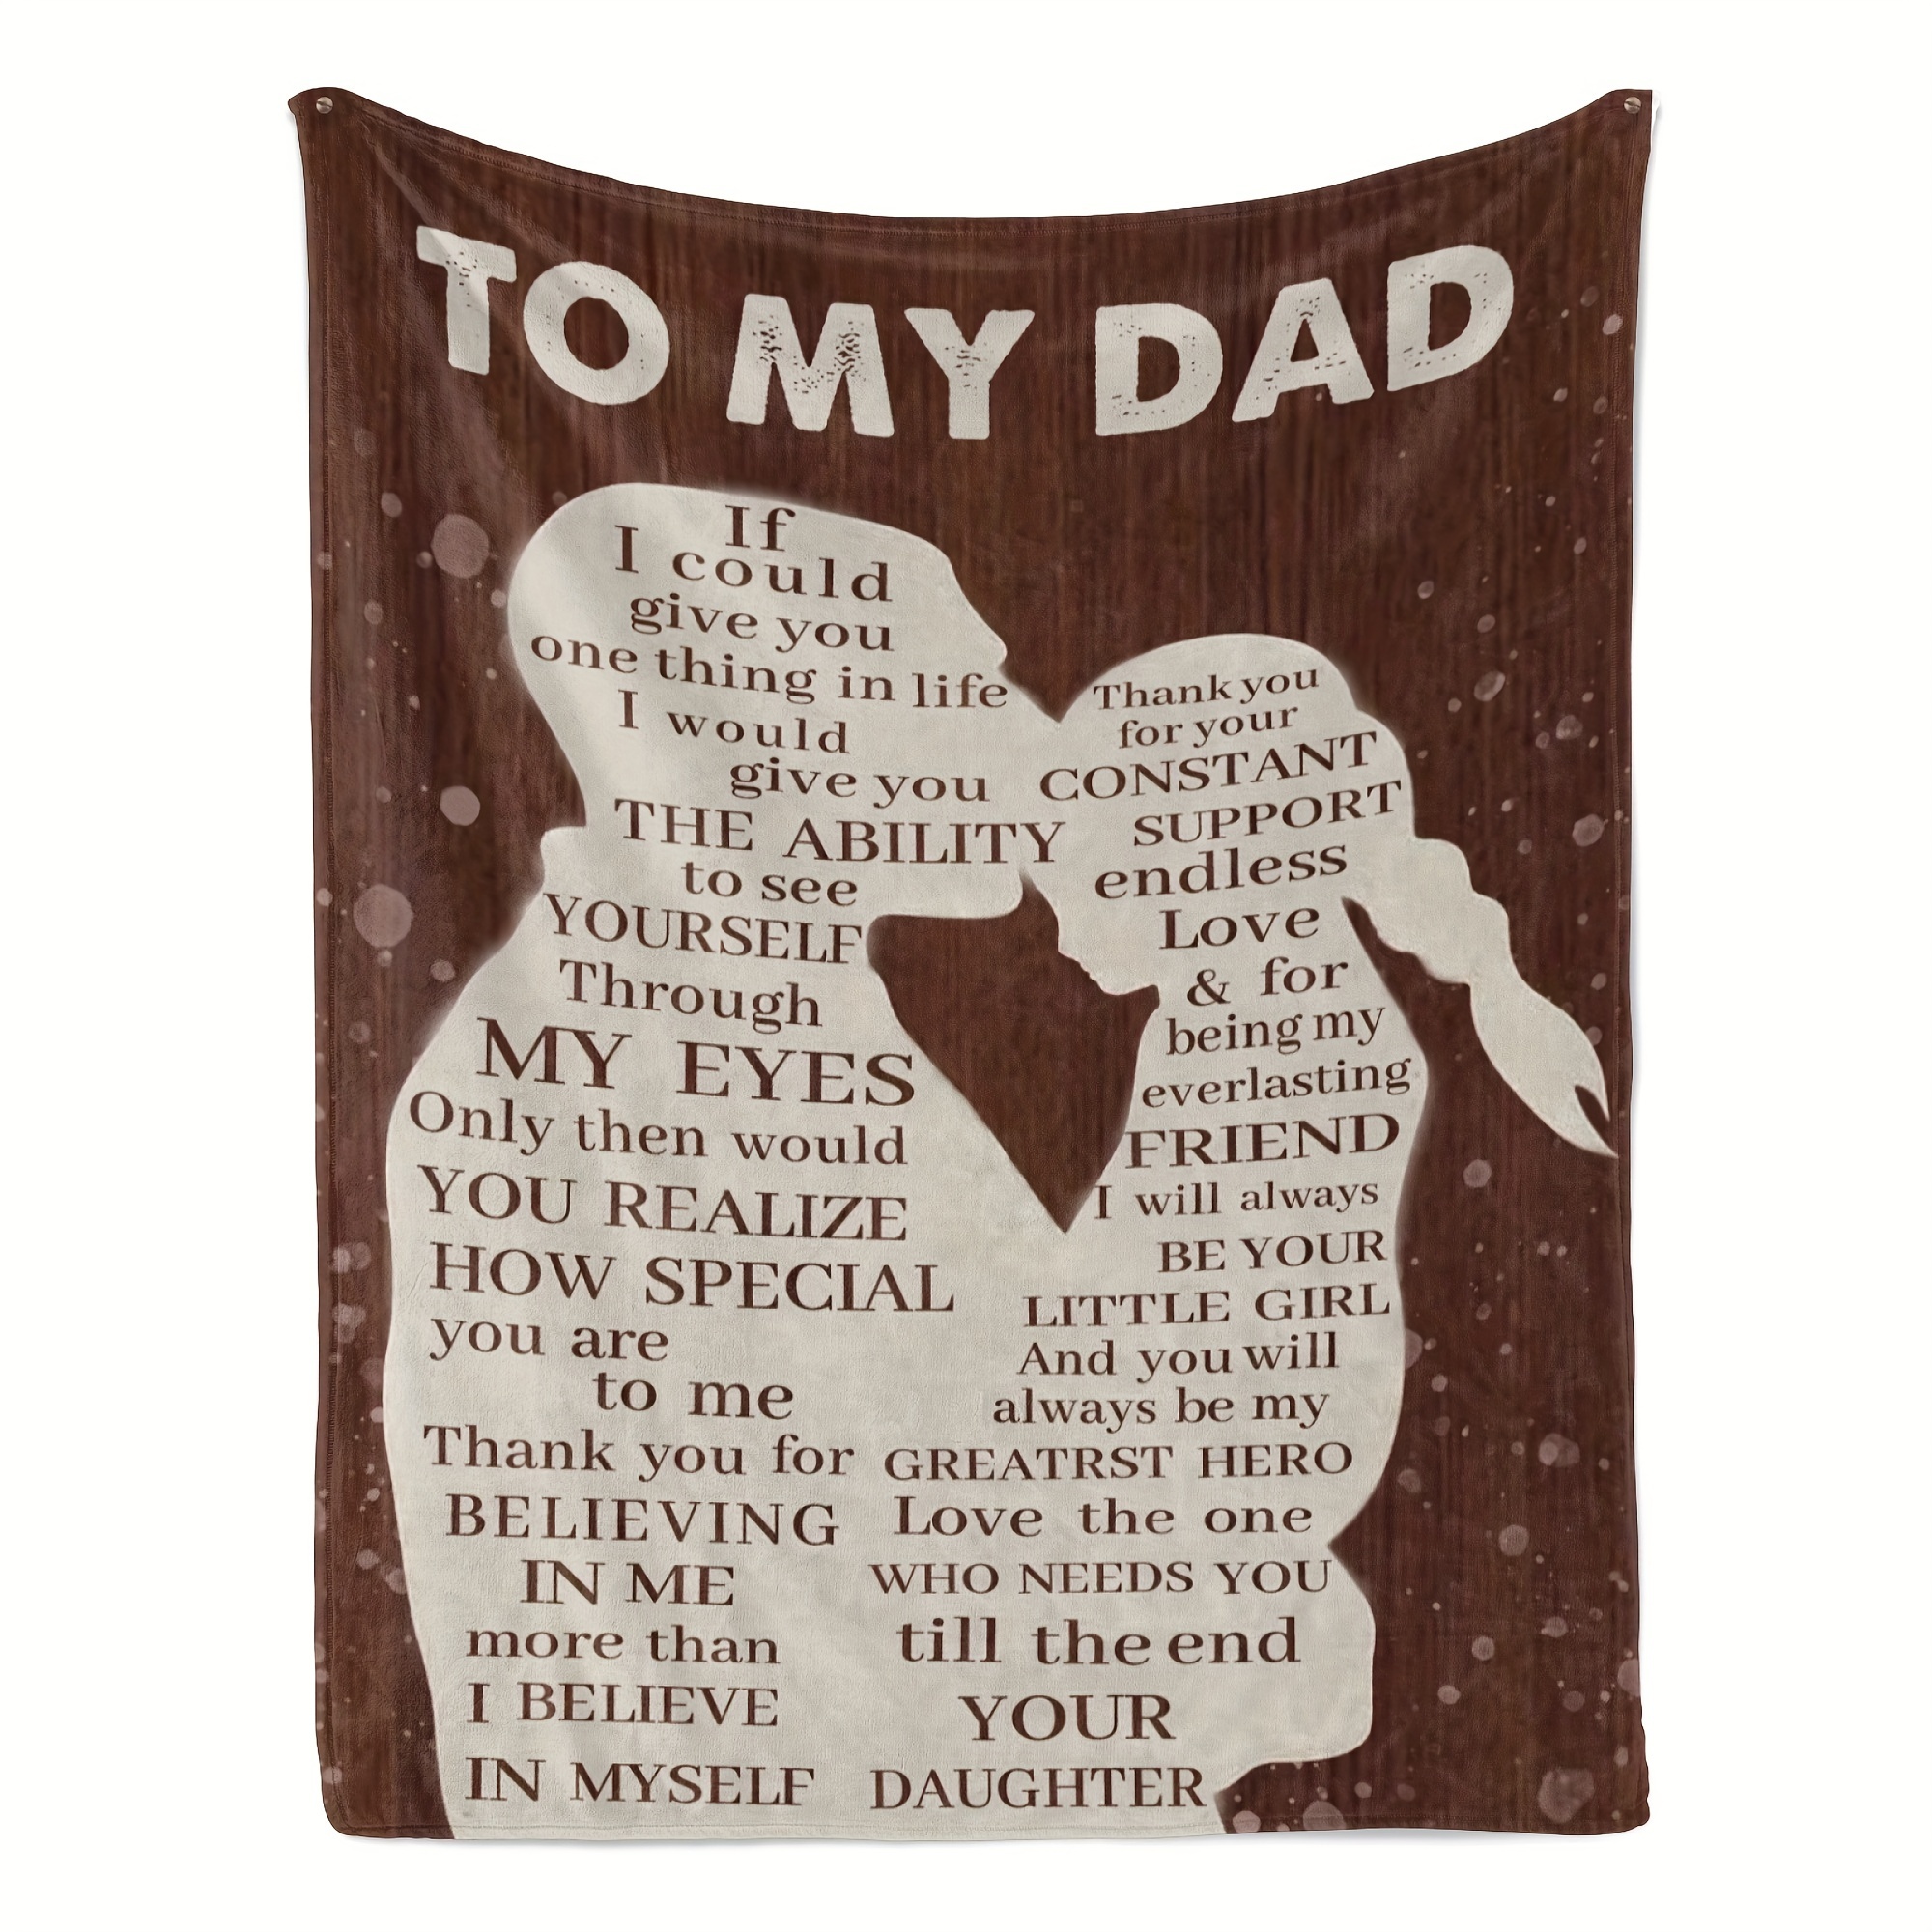 

Fathers Day To My Dad Gifts From Daughter For Dad Birthday Valentines Day Bday Gift Ideas For Dads Father Husband Men Him Unique Gifts Personalized Throw Blanket